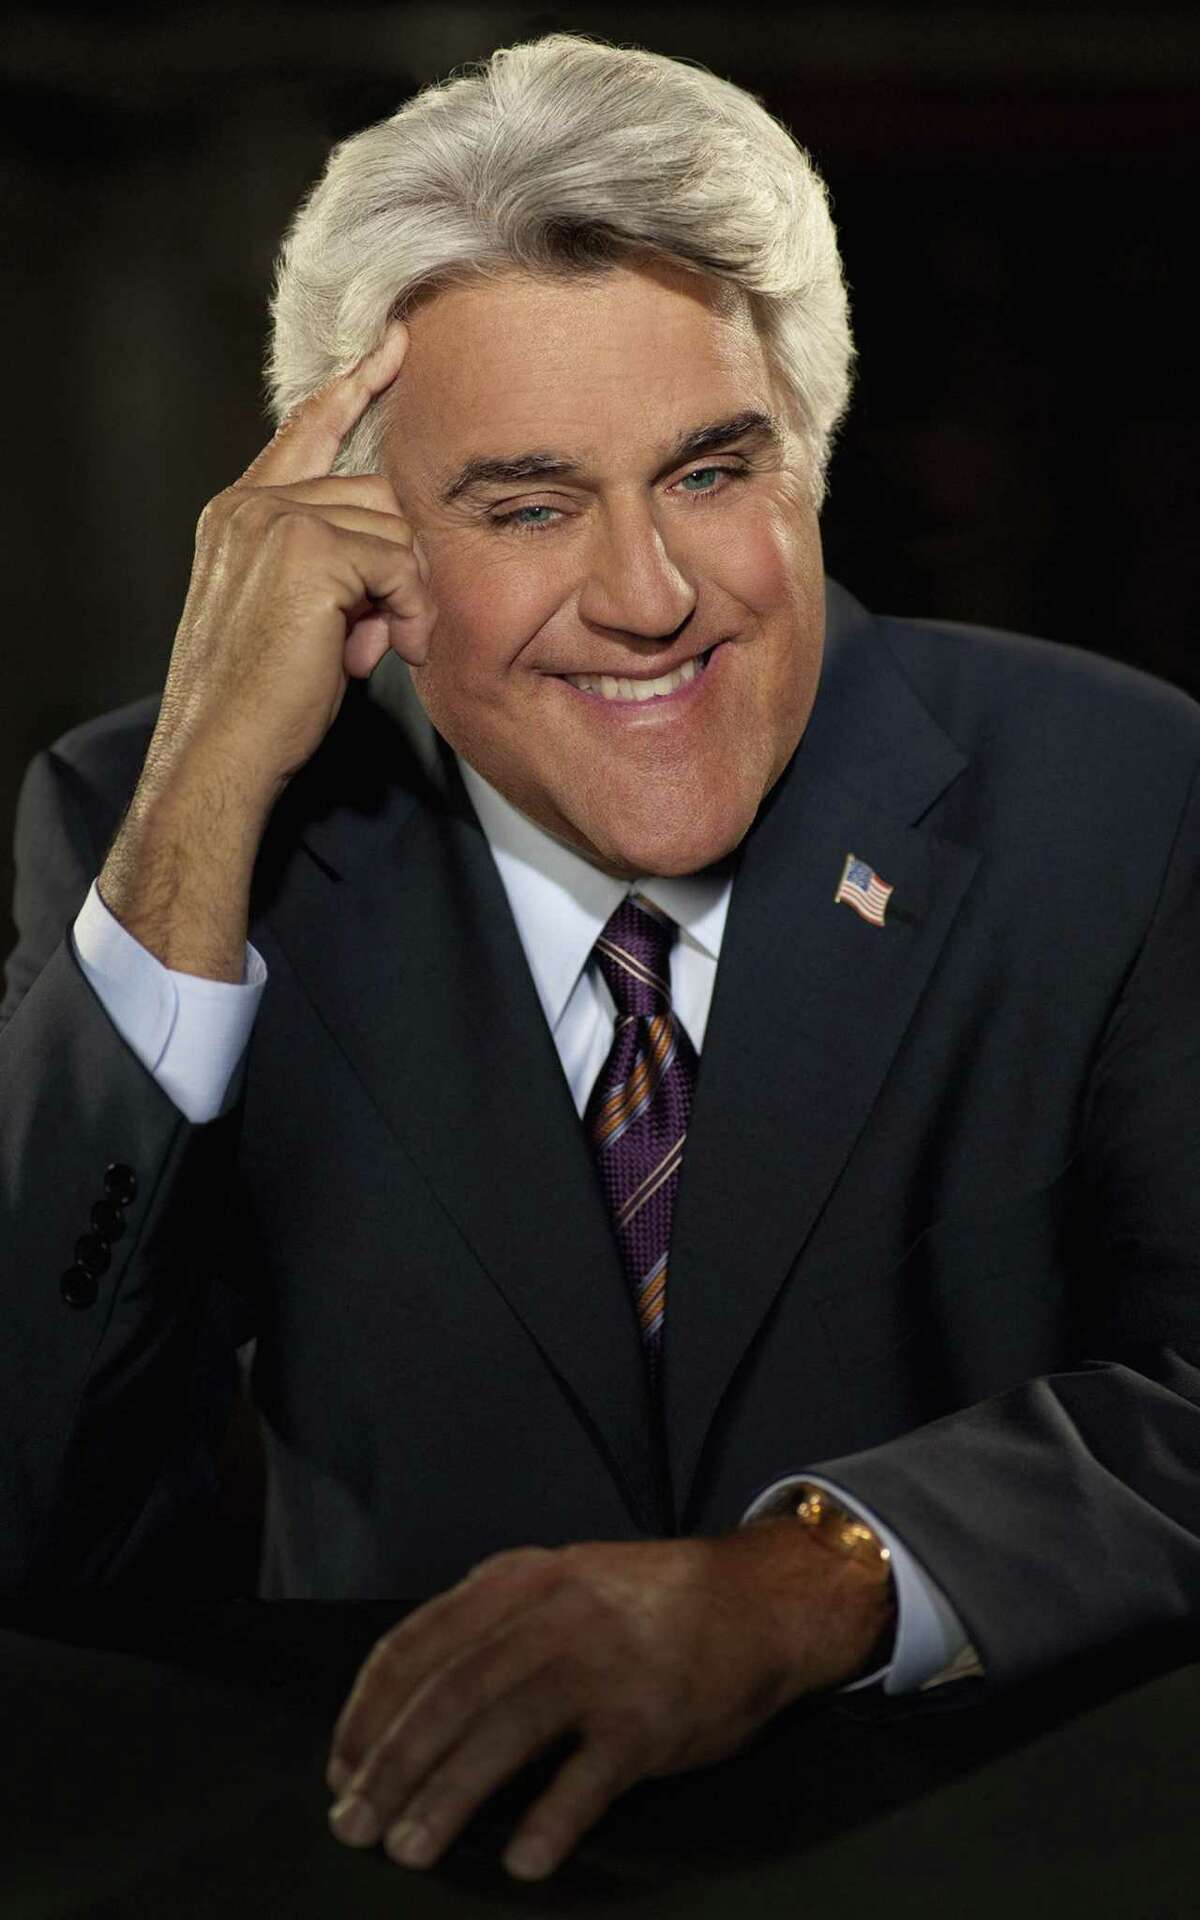 Former “Tonight Show” host Jay Leno brings his stand-up comedy act to the Majestic Theatre on Friday night.